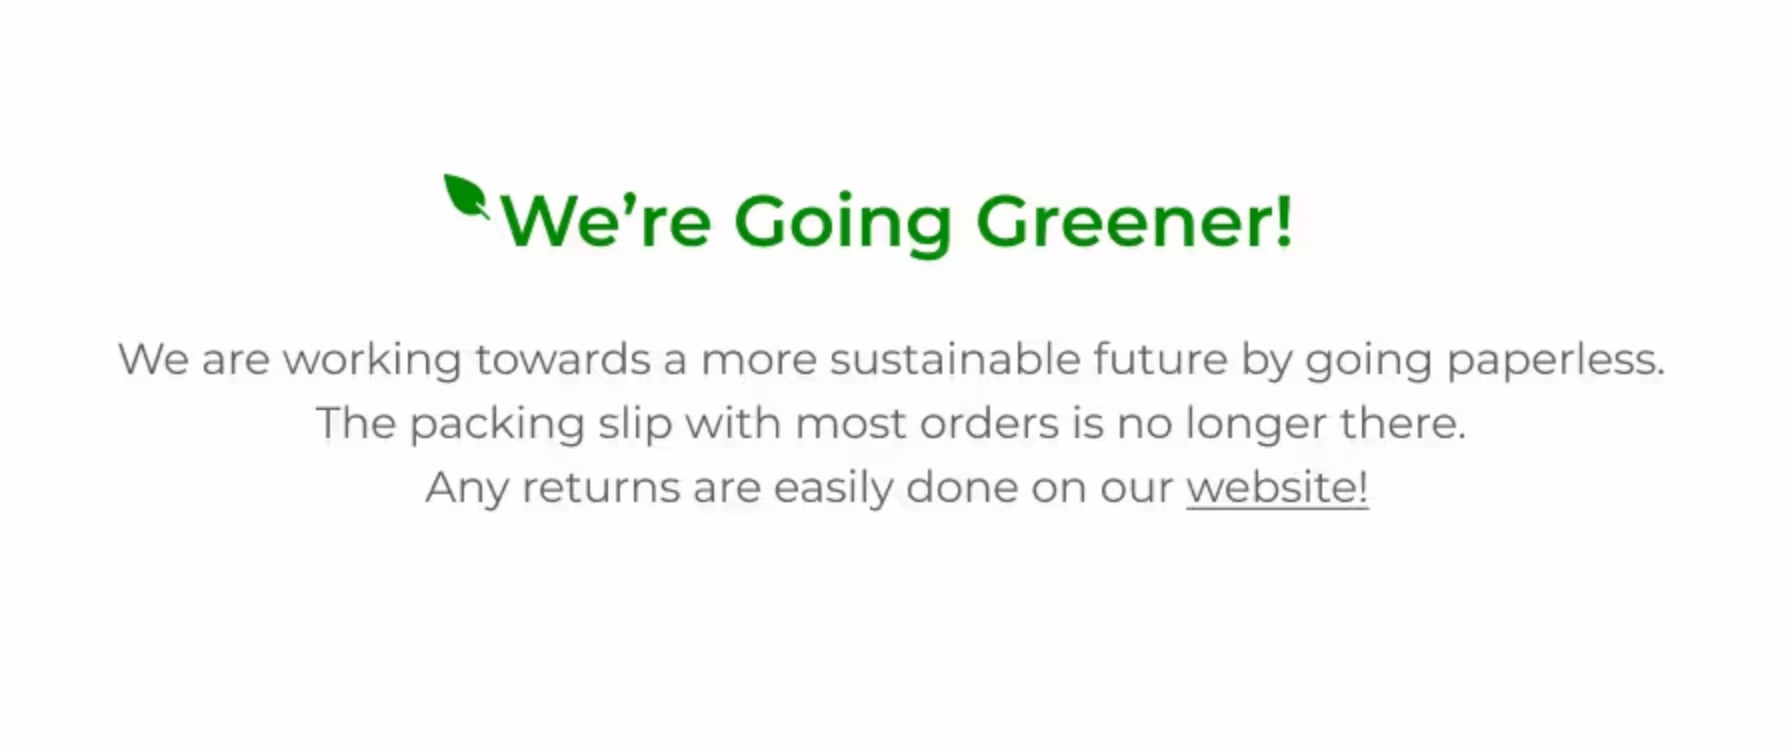 We're Going Greener! We are working towards a more sustainable future by going paperless. The packing slip with most orders is no longer there. Any returns are easily done on our website!